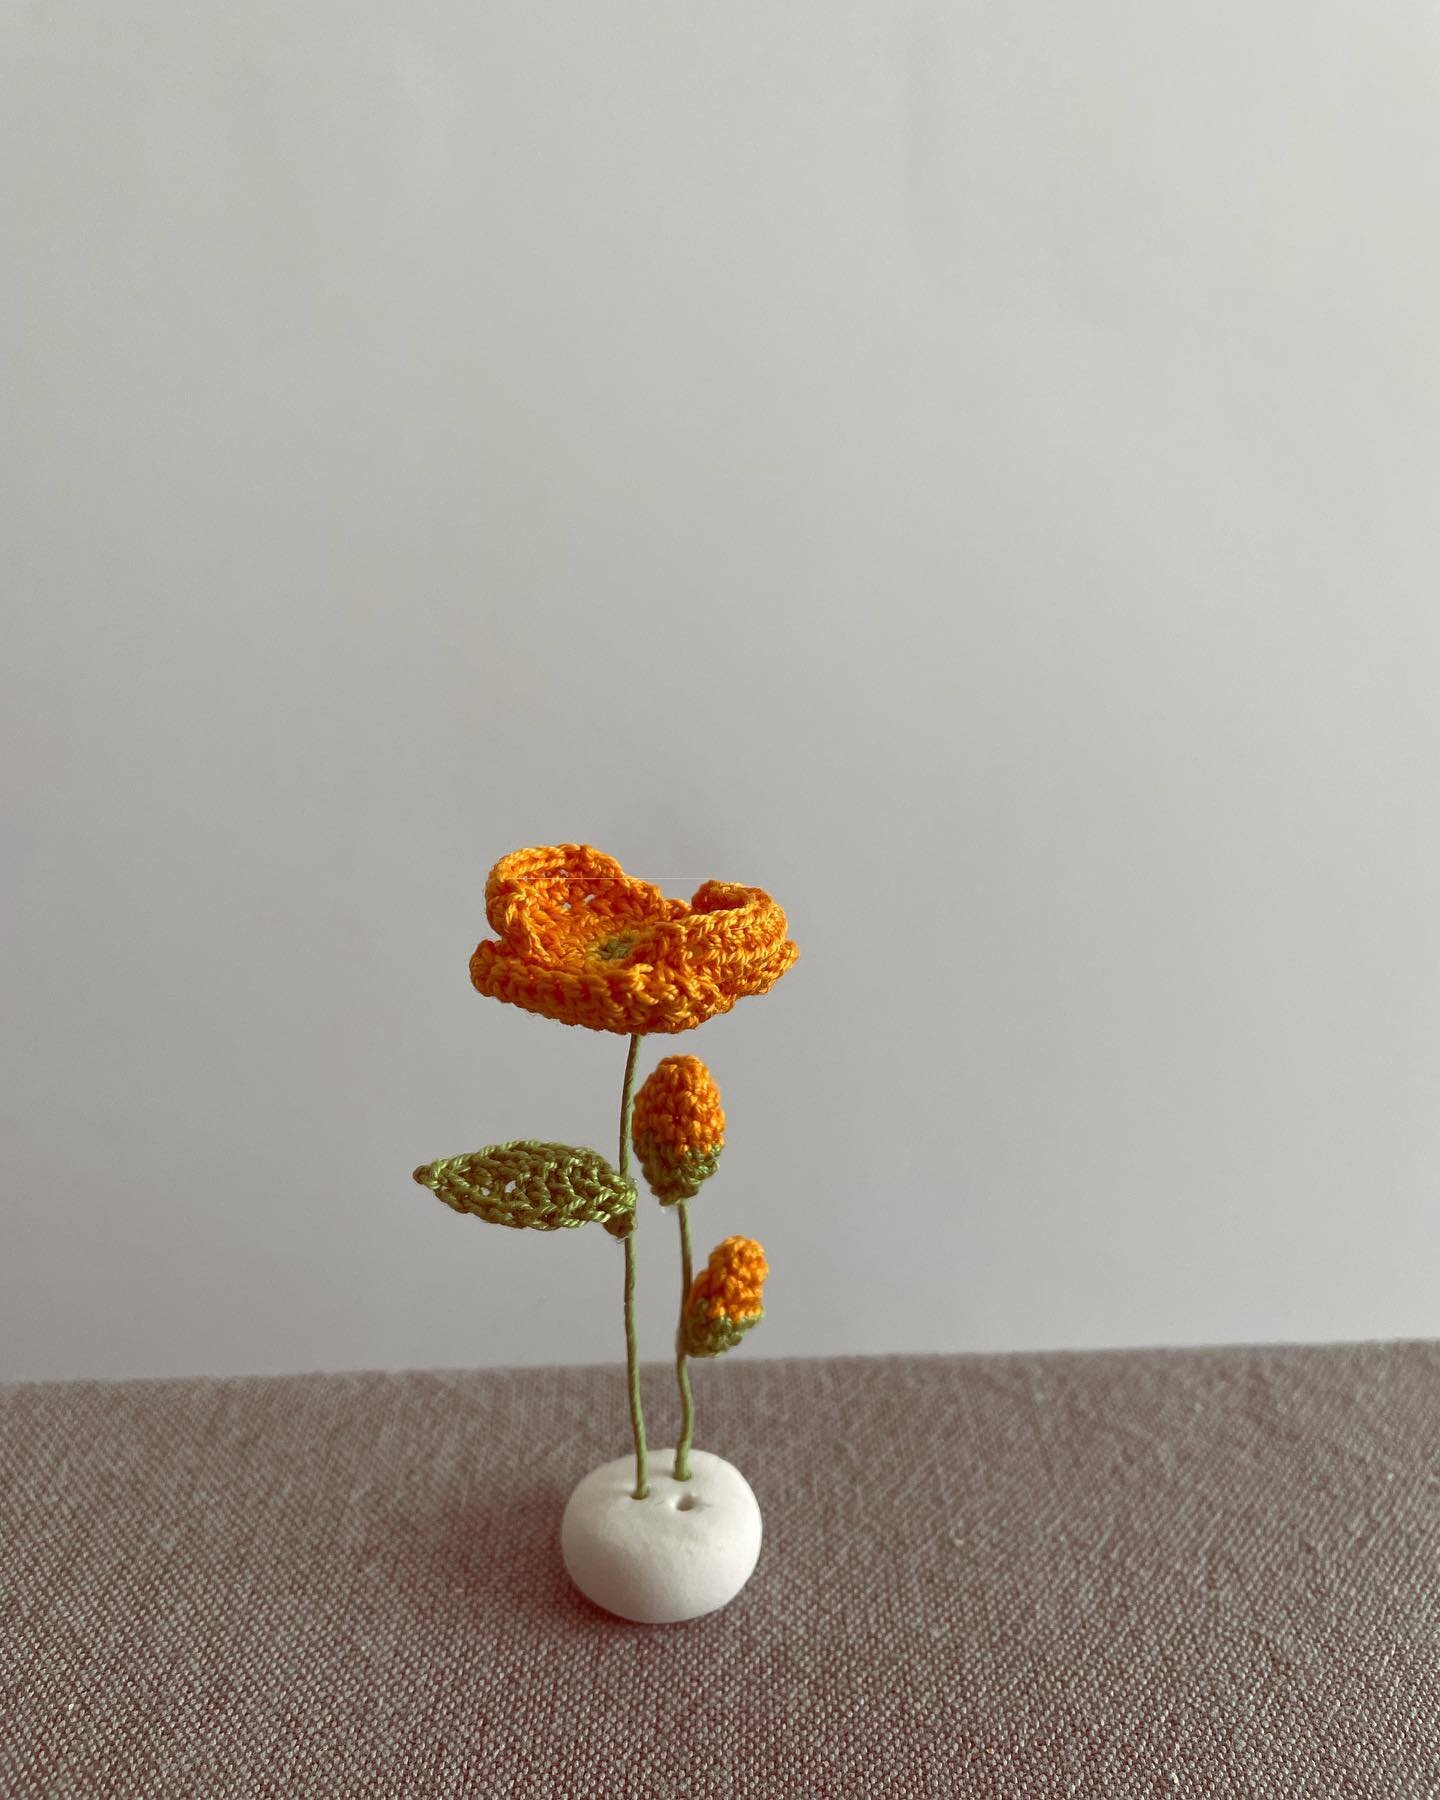 Orange poppy flower 
These tiny flowers are about 7-10 cm tall. I love how delicate they are. 
.
.
.
.
.
.
#crochet#crochetflower#crochetpoppy#poppyflower